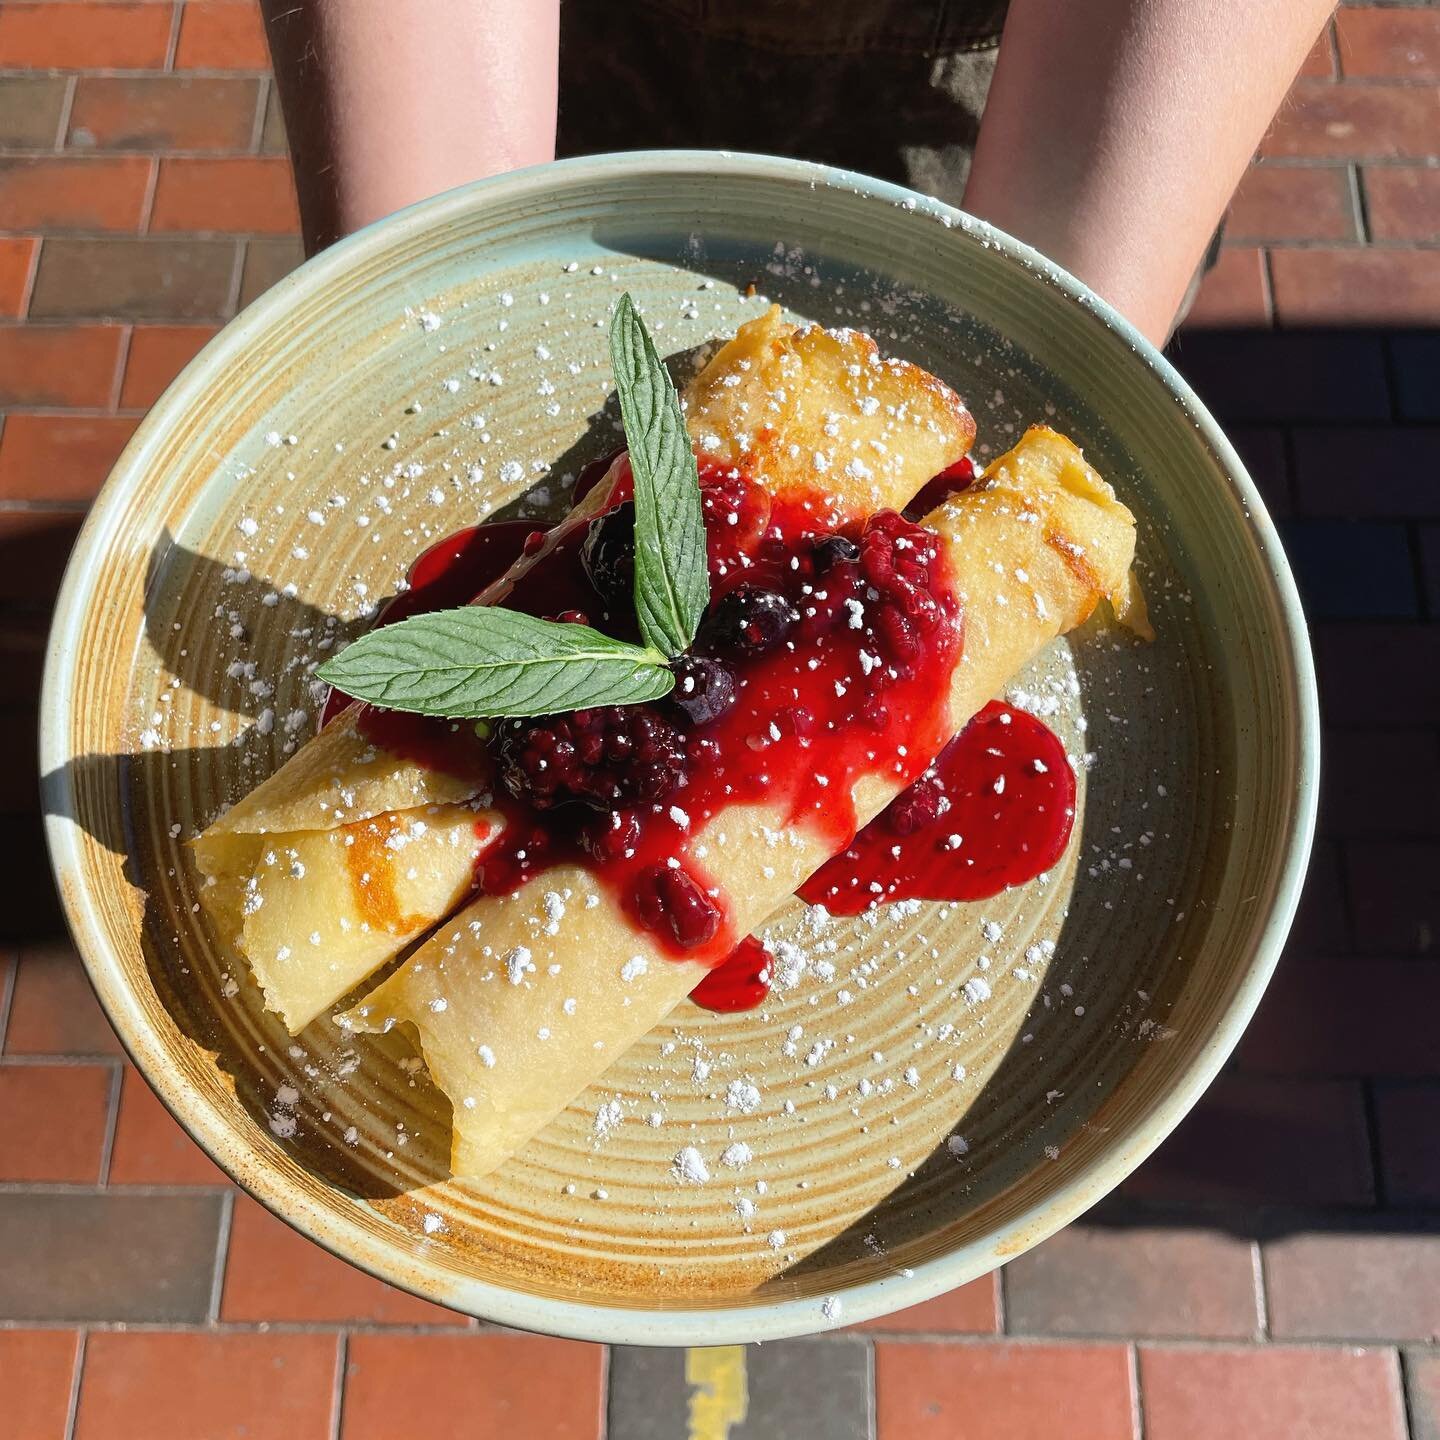 mmm Berry Crepes !! 
Try our new special; mixed berry crepes with Vanilla-cream filling🫐🍓🥞🥰🤤